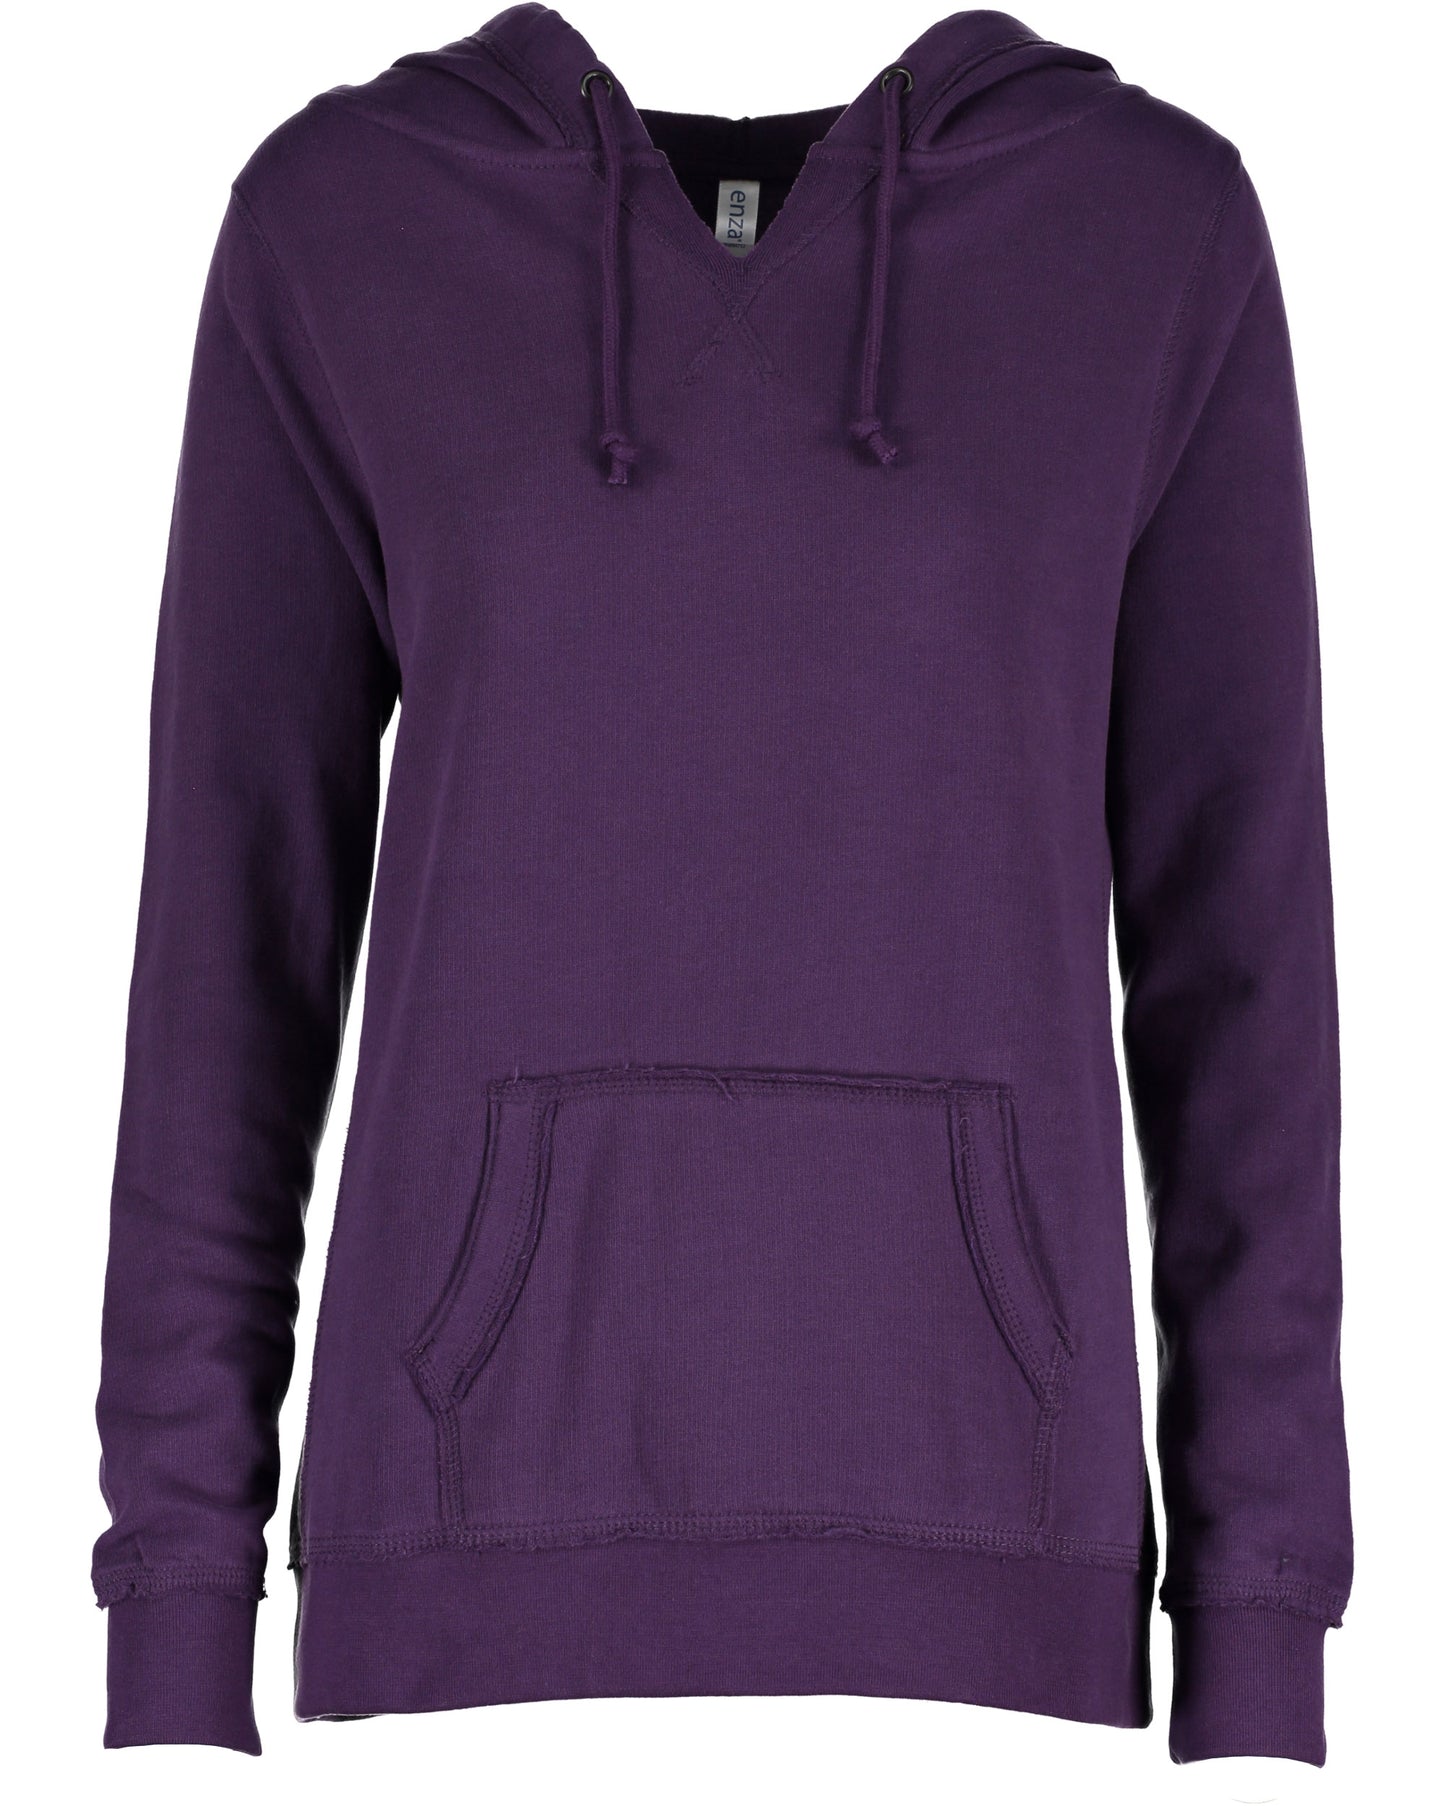 LL "Life is Better at Loon Lake" Enza Ladies V-Notch Fleece Pullover Hood